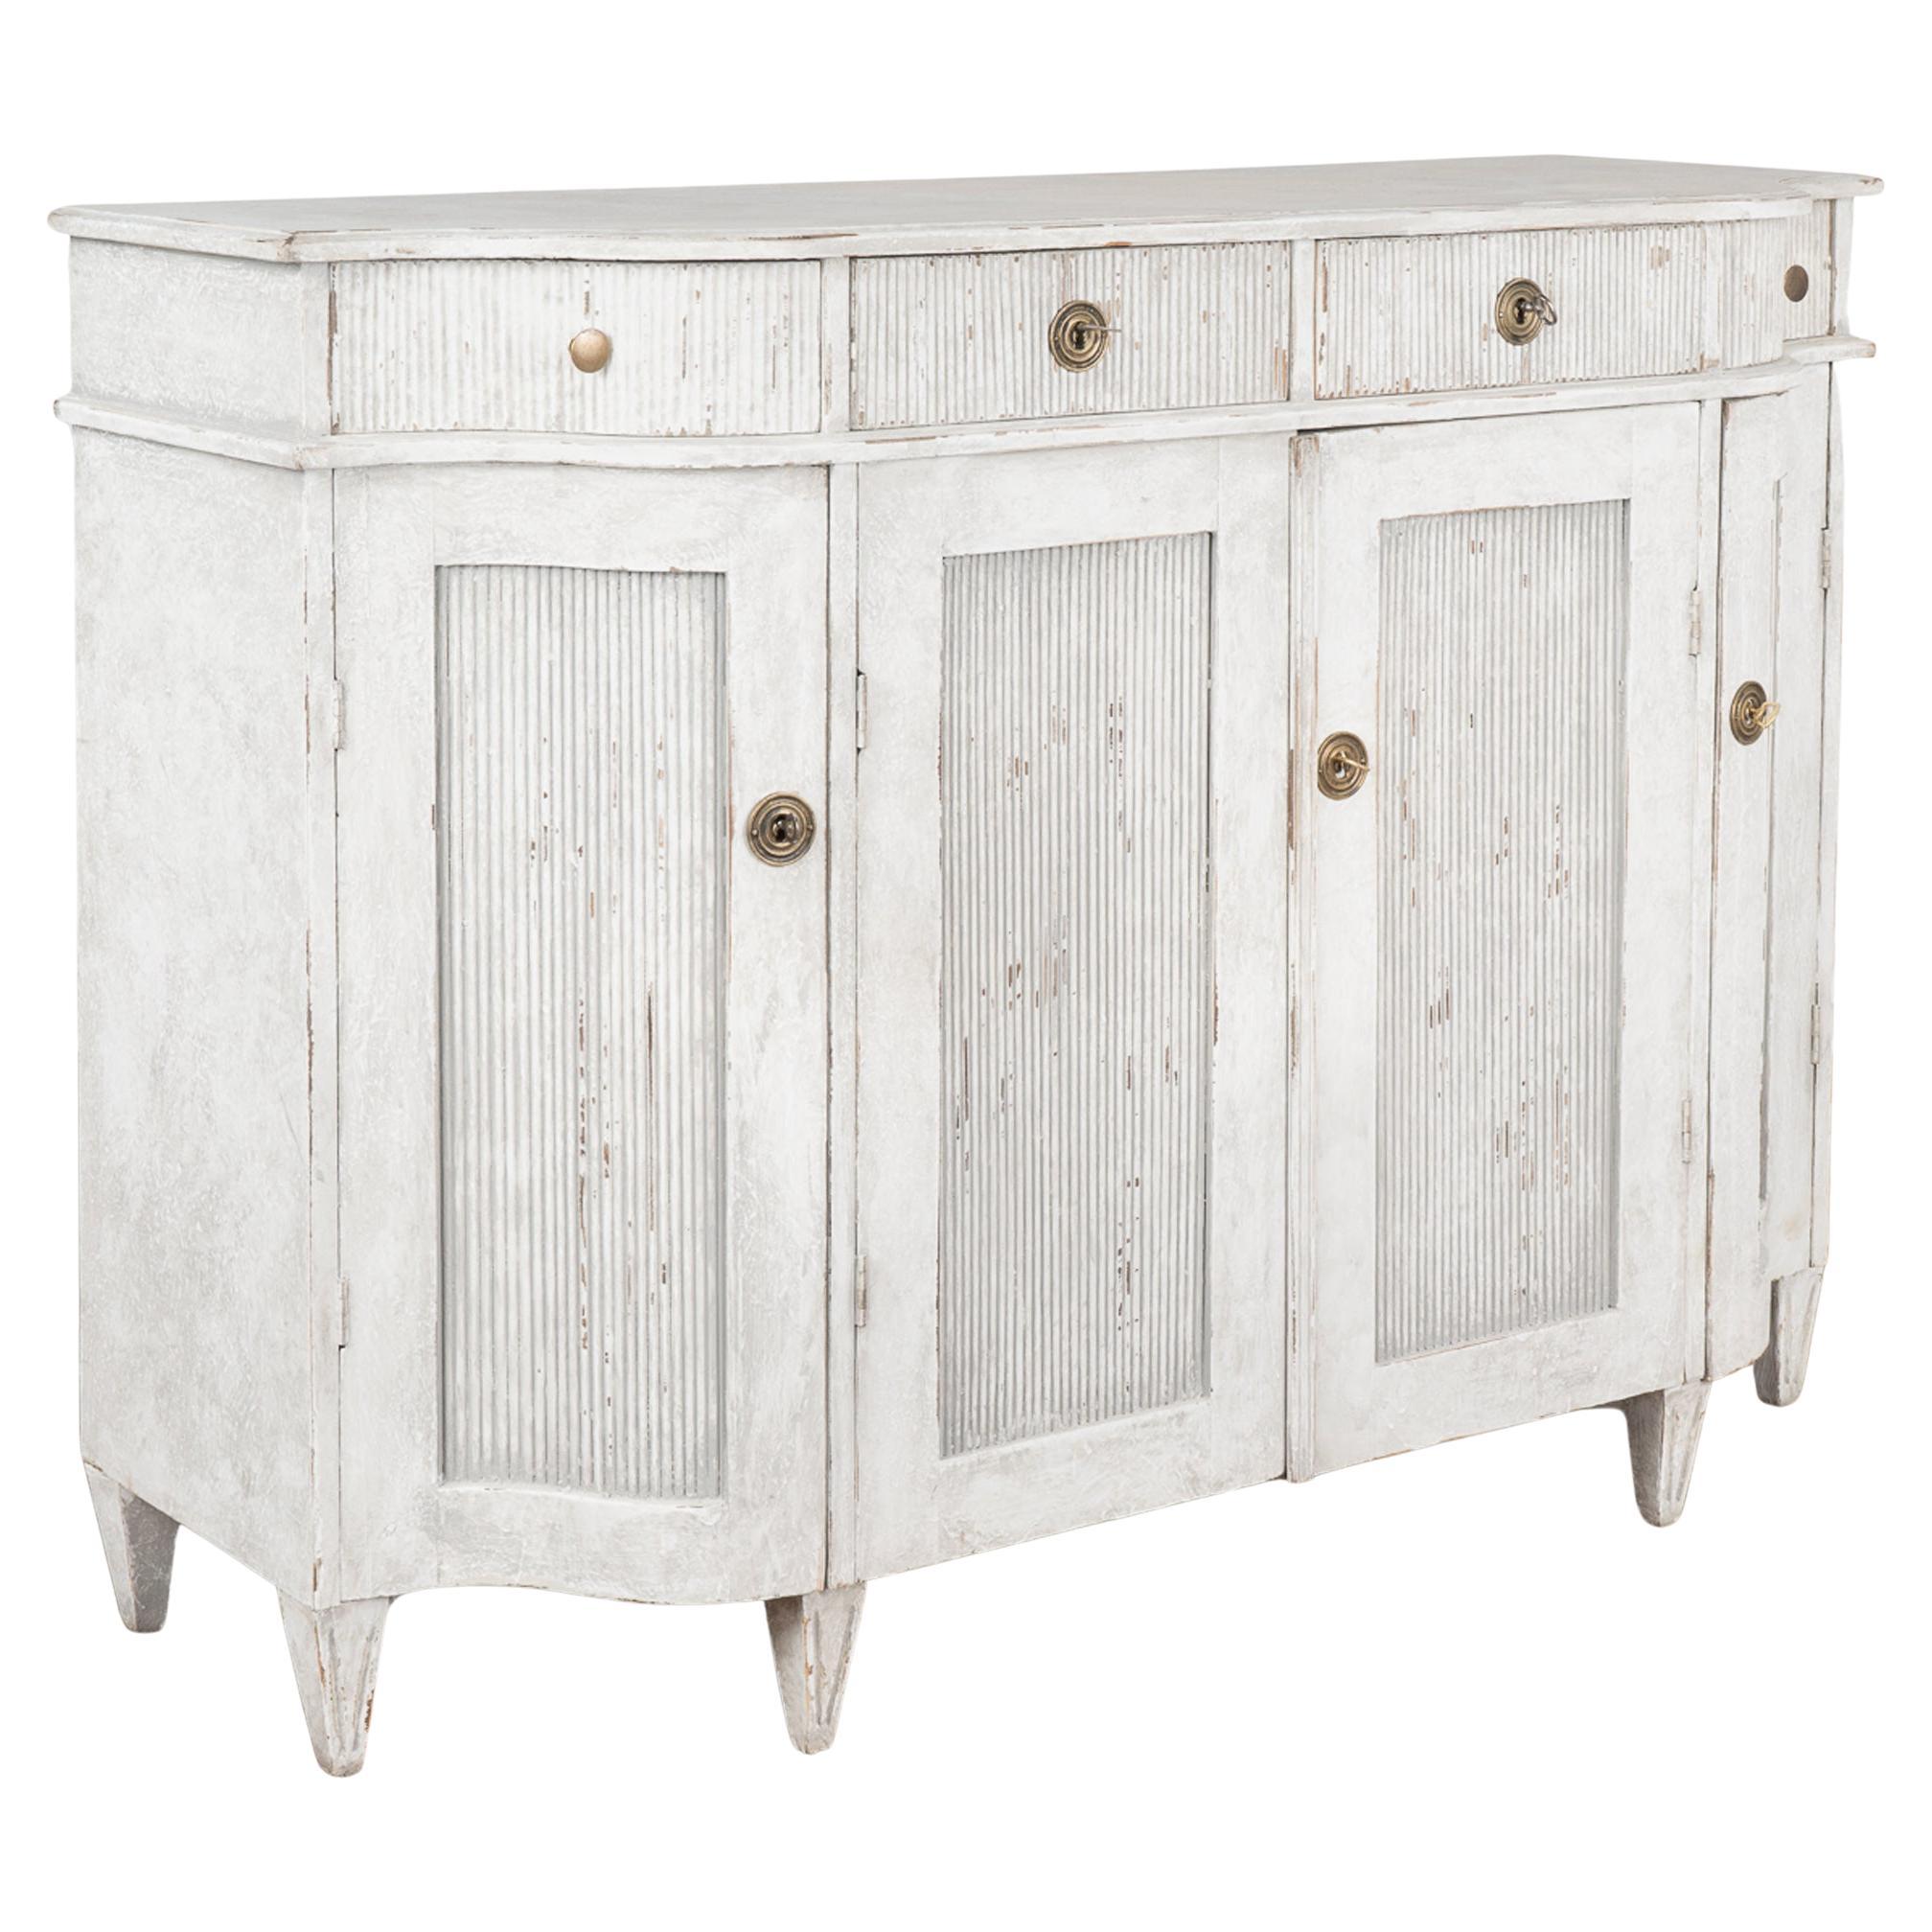 Gustavian Gray Painted Sideboard Buffet, Sweden circa 1860-80 For Sale